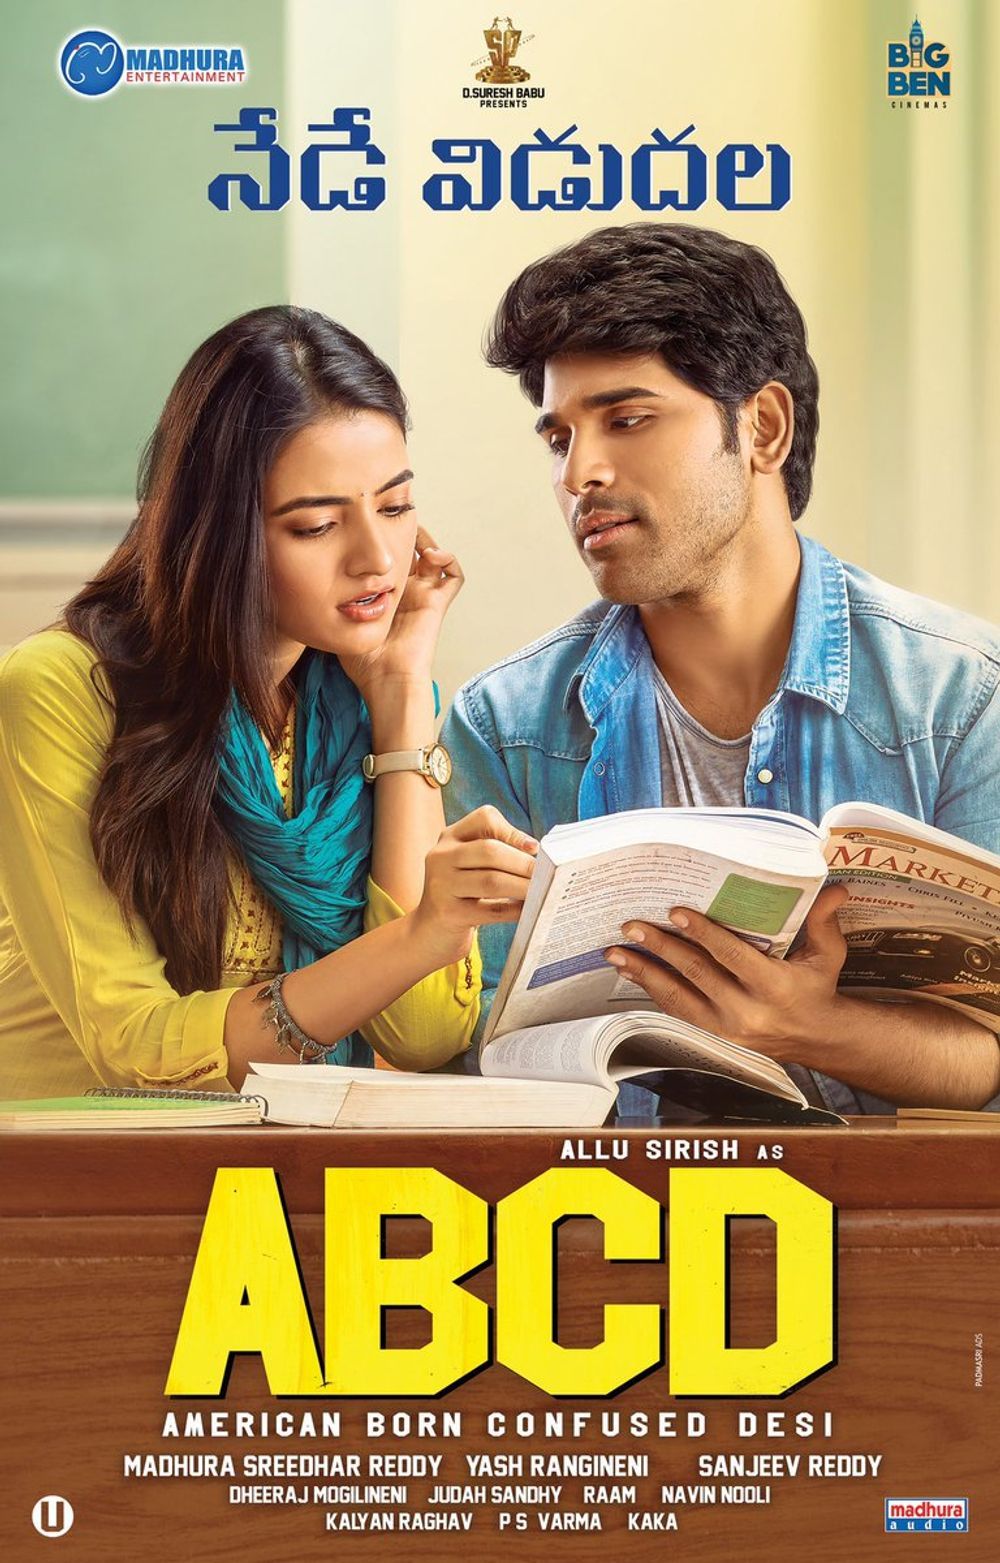 ABCD (American Born Confused Desi) 2021 Hindi Dubbed HDRip download full movie